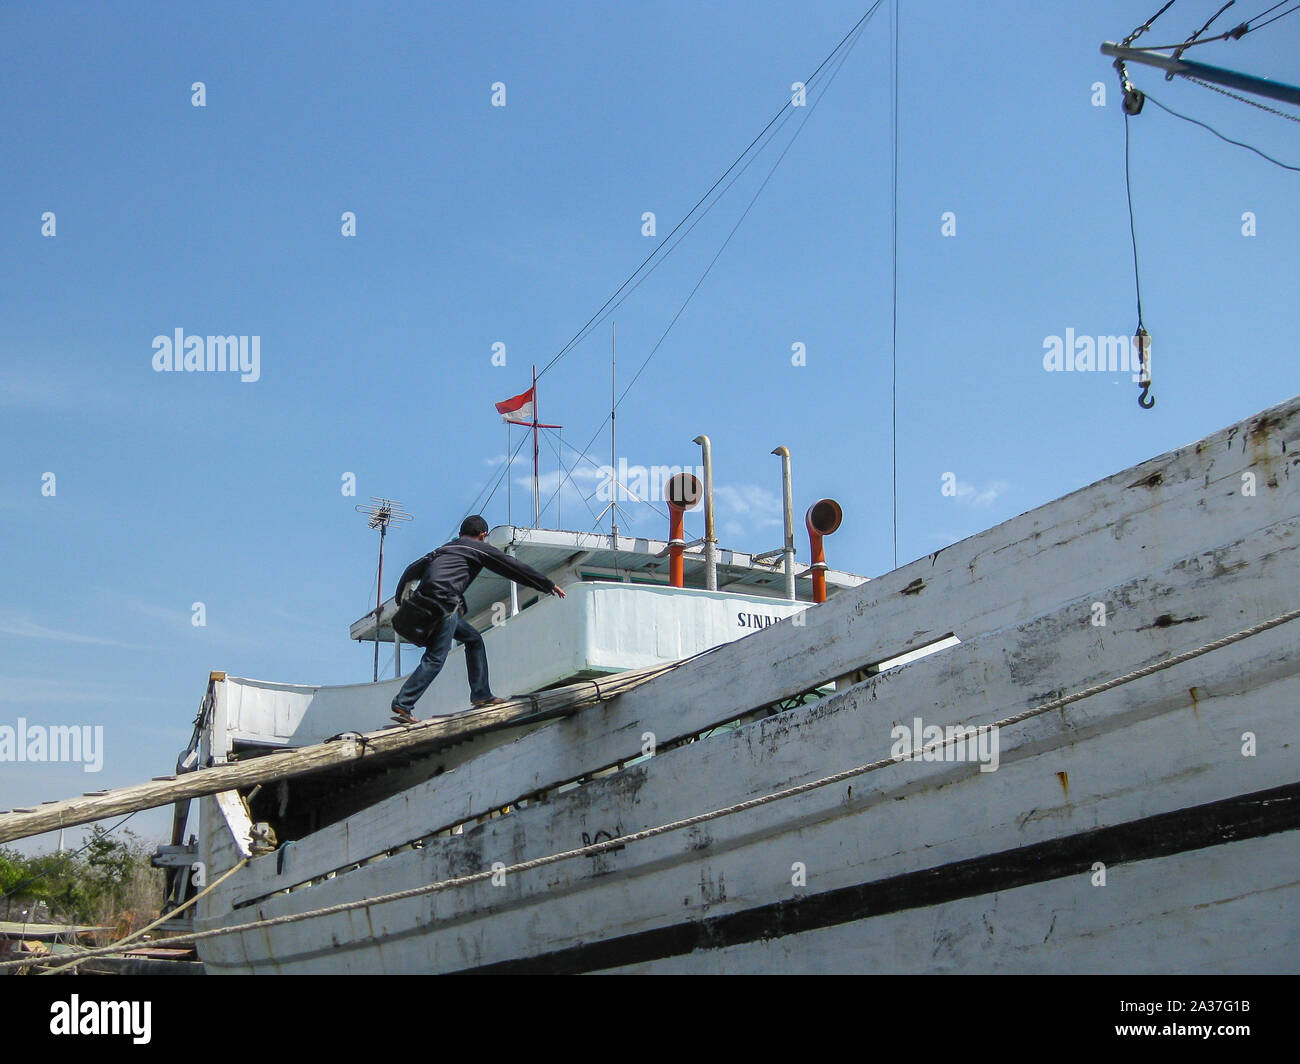 Jakarta, Indonesia - July 13, 2009: a man ascends a wooden ship on a wooden beam in front of a wooden ship in white, green and red Stock Photo